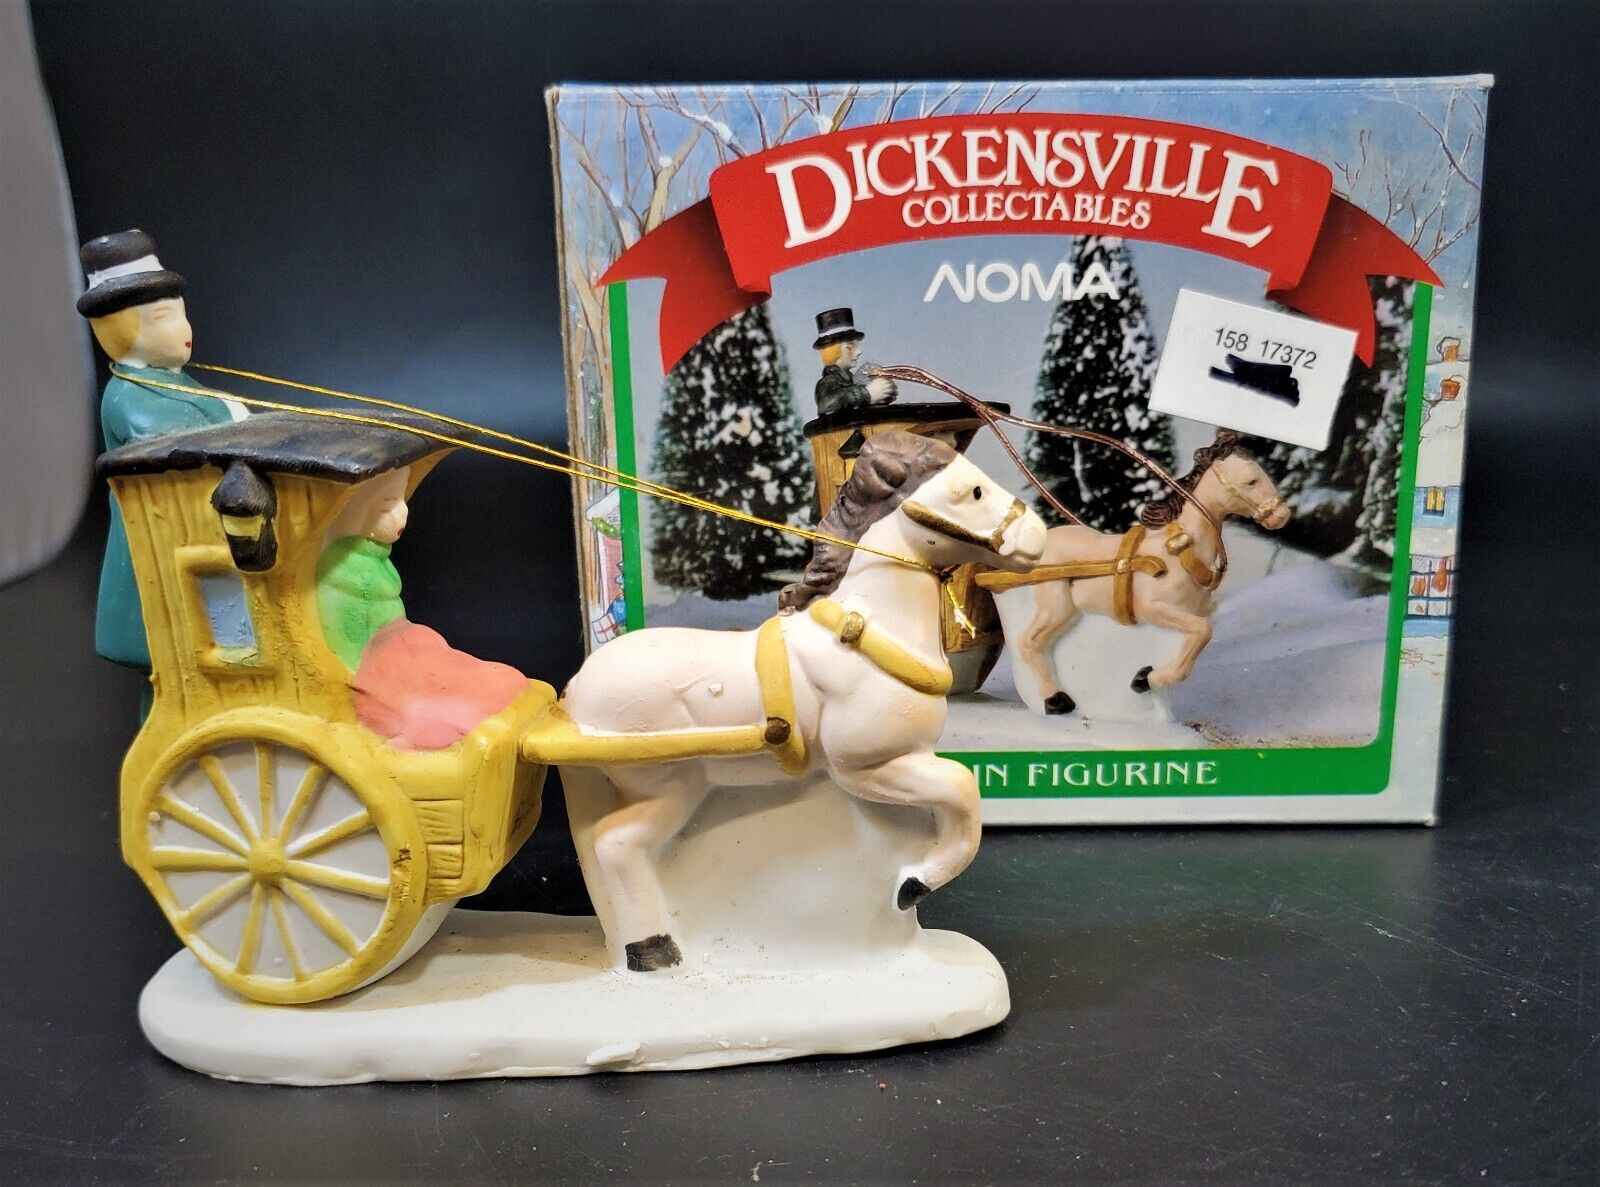 DICKENSVILLE COLLECTABLES 1991 Horse Drawn Carriage Porcelain Figurine NOMA 6149